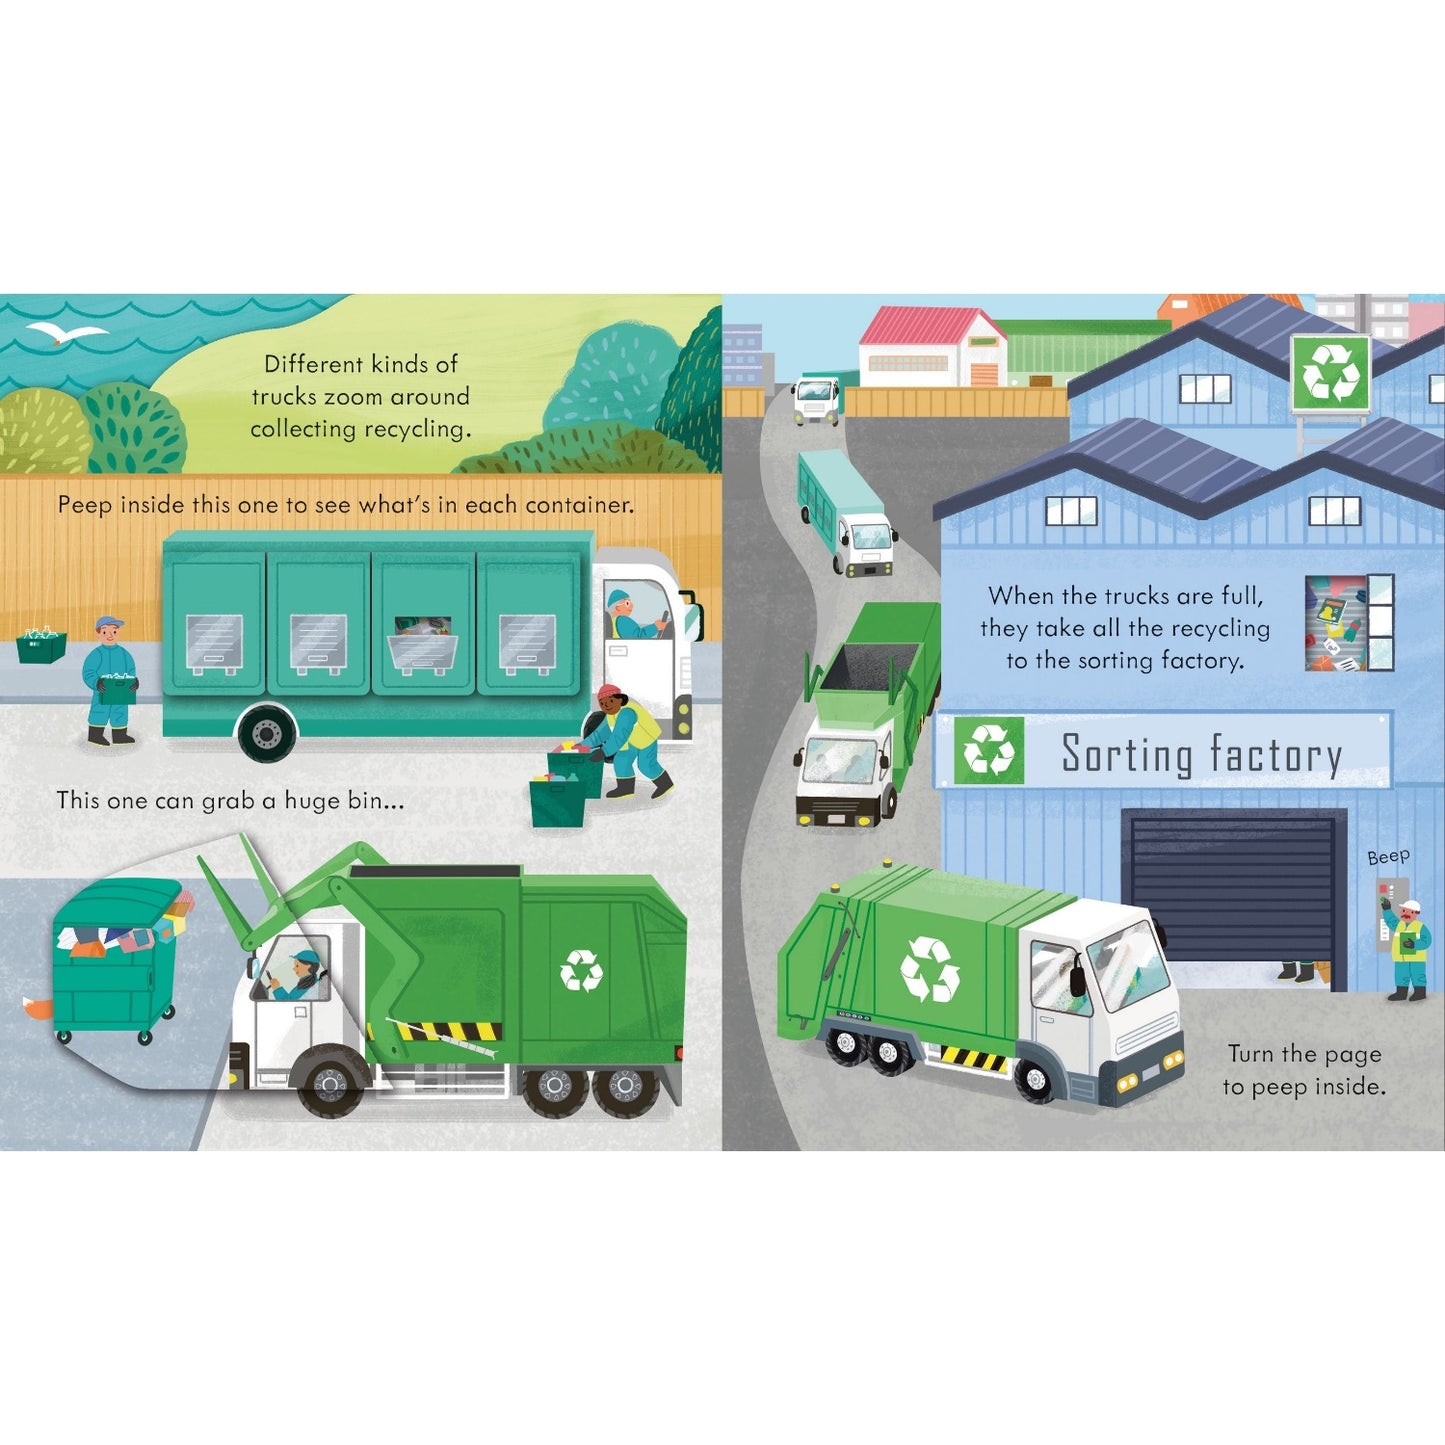 Peep Inside How A Recycling Truck Works | Children's Book on Recycling & Green Living